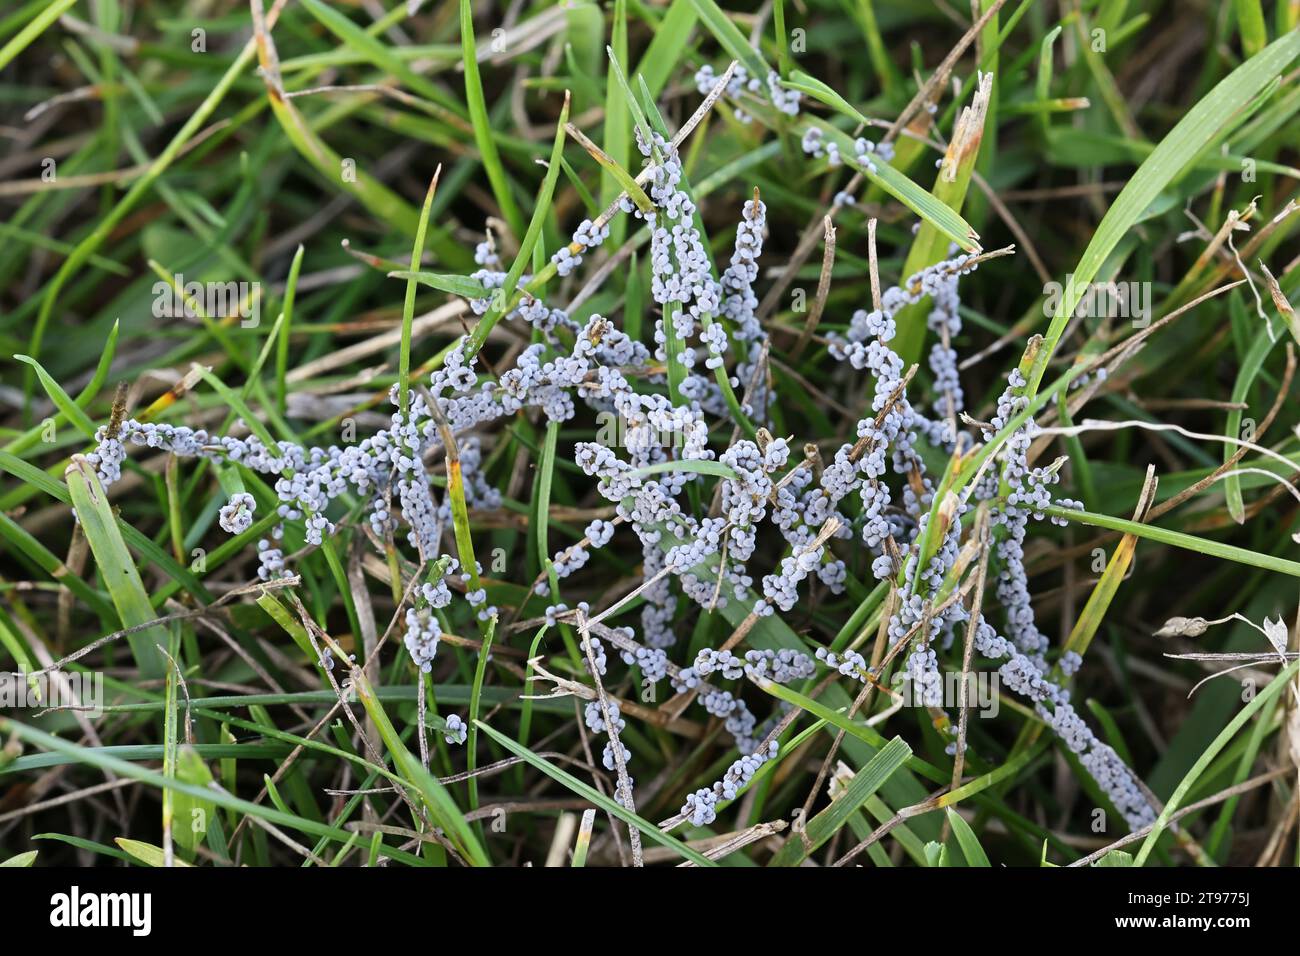 Physarum cinereum, known as grey slime mold, growing  on lawn in Finland Stock Photo